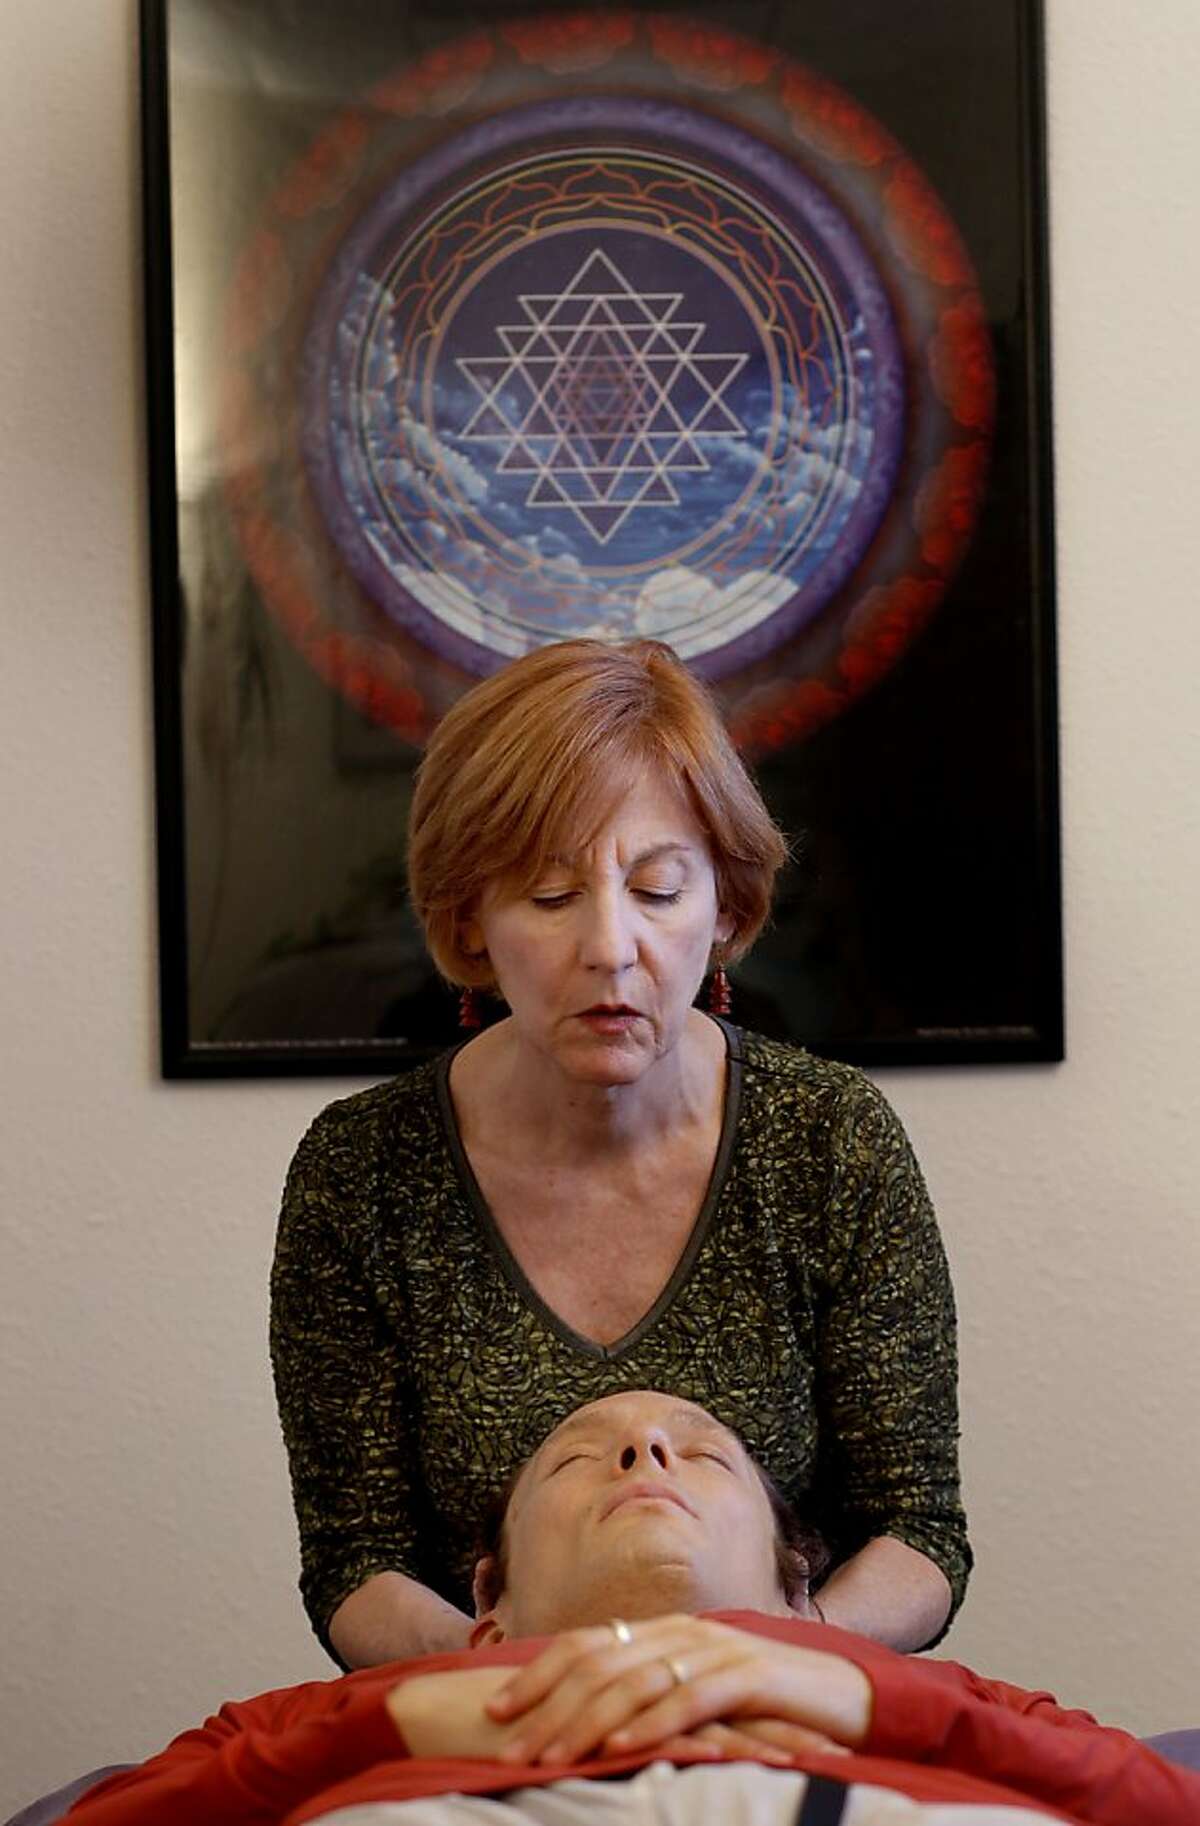 Linda Wobeskya manipulated the neck of Brian Theard during a zero balancing session. Personal trainer Linda Wobeskya is a Zero Balancing therapist in Mill Valley, Calif. Zero Balancing is a mind-body healing technique which incorporates both eastern and western wellness techniques.